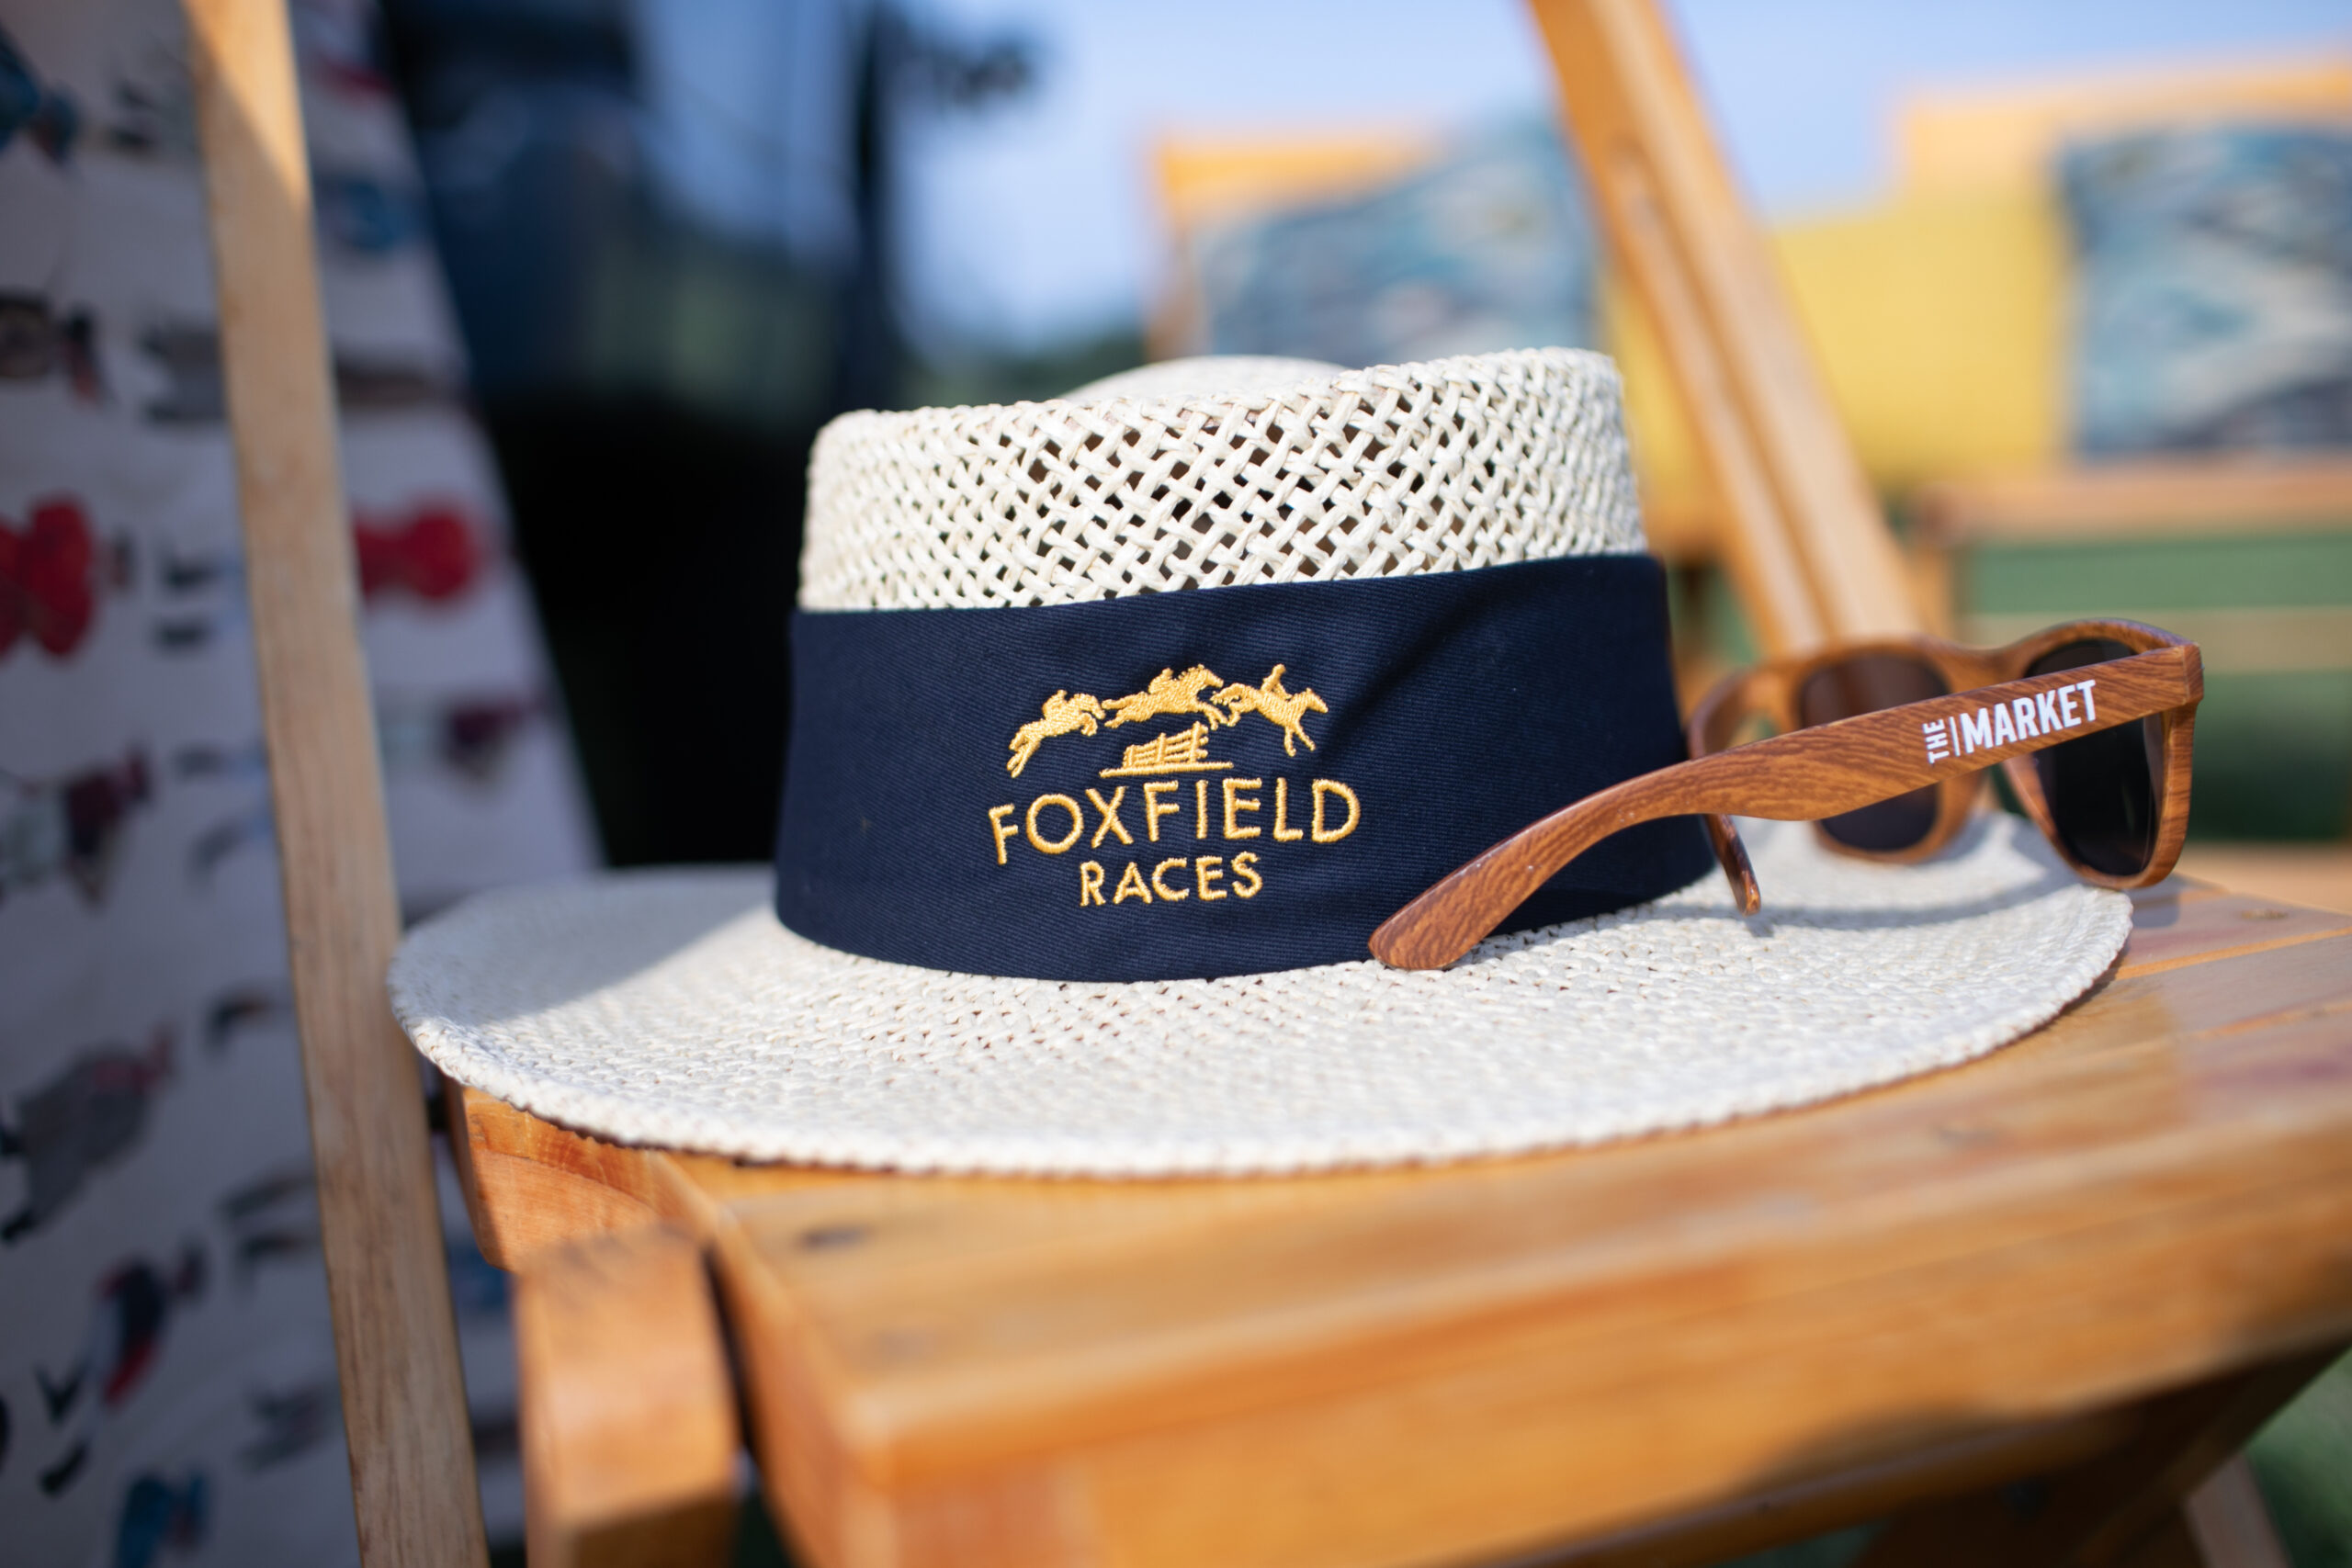 Tiger x Foxfield TAILGATE CATERING PACKAGE